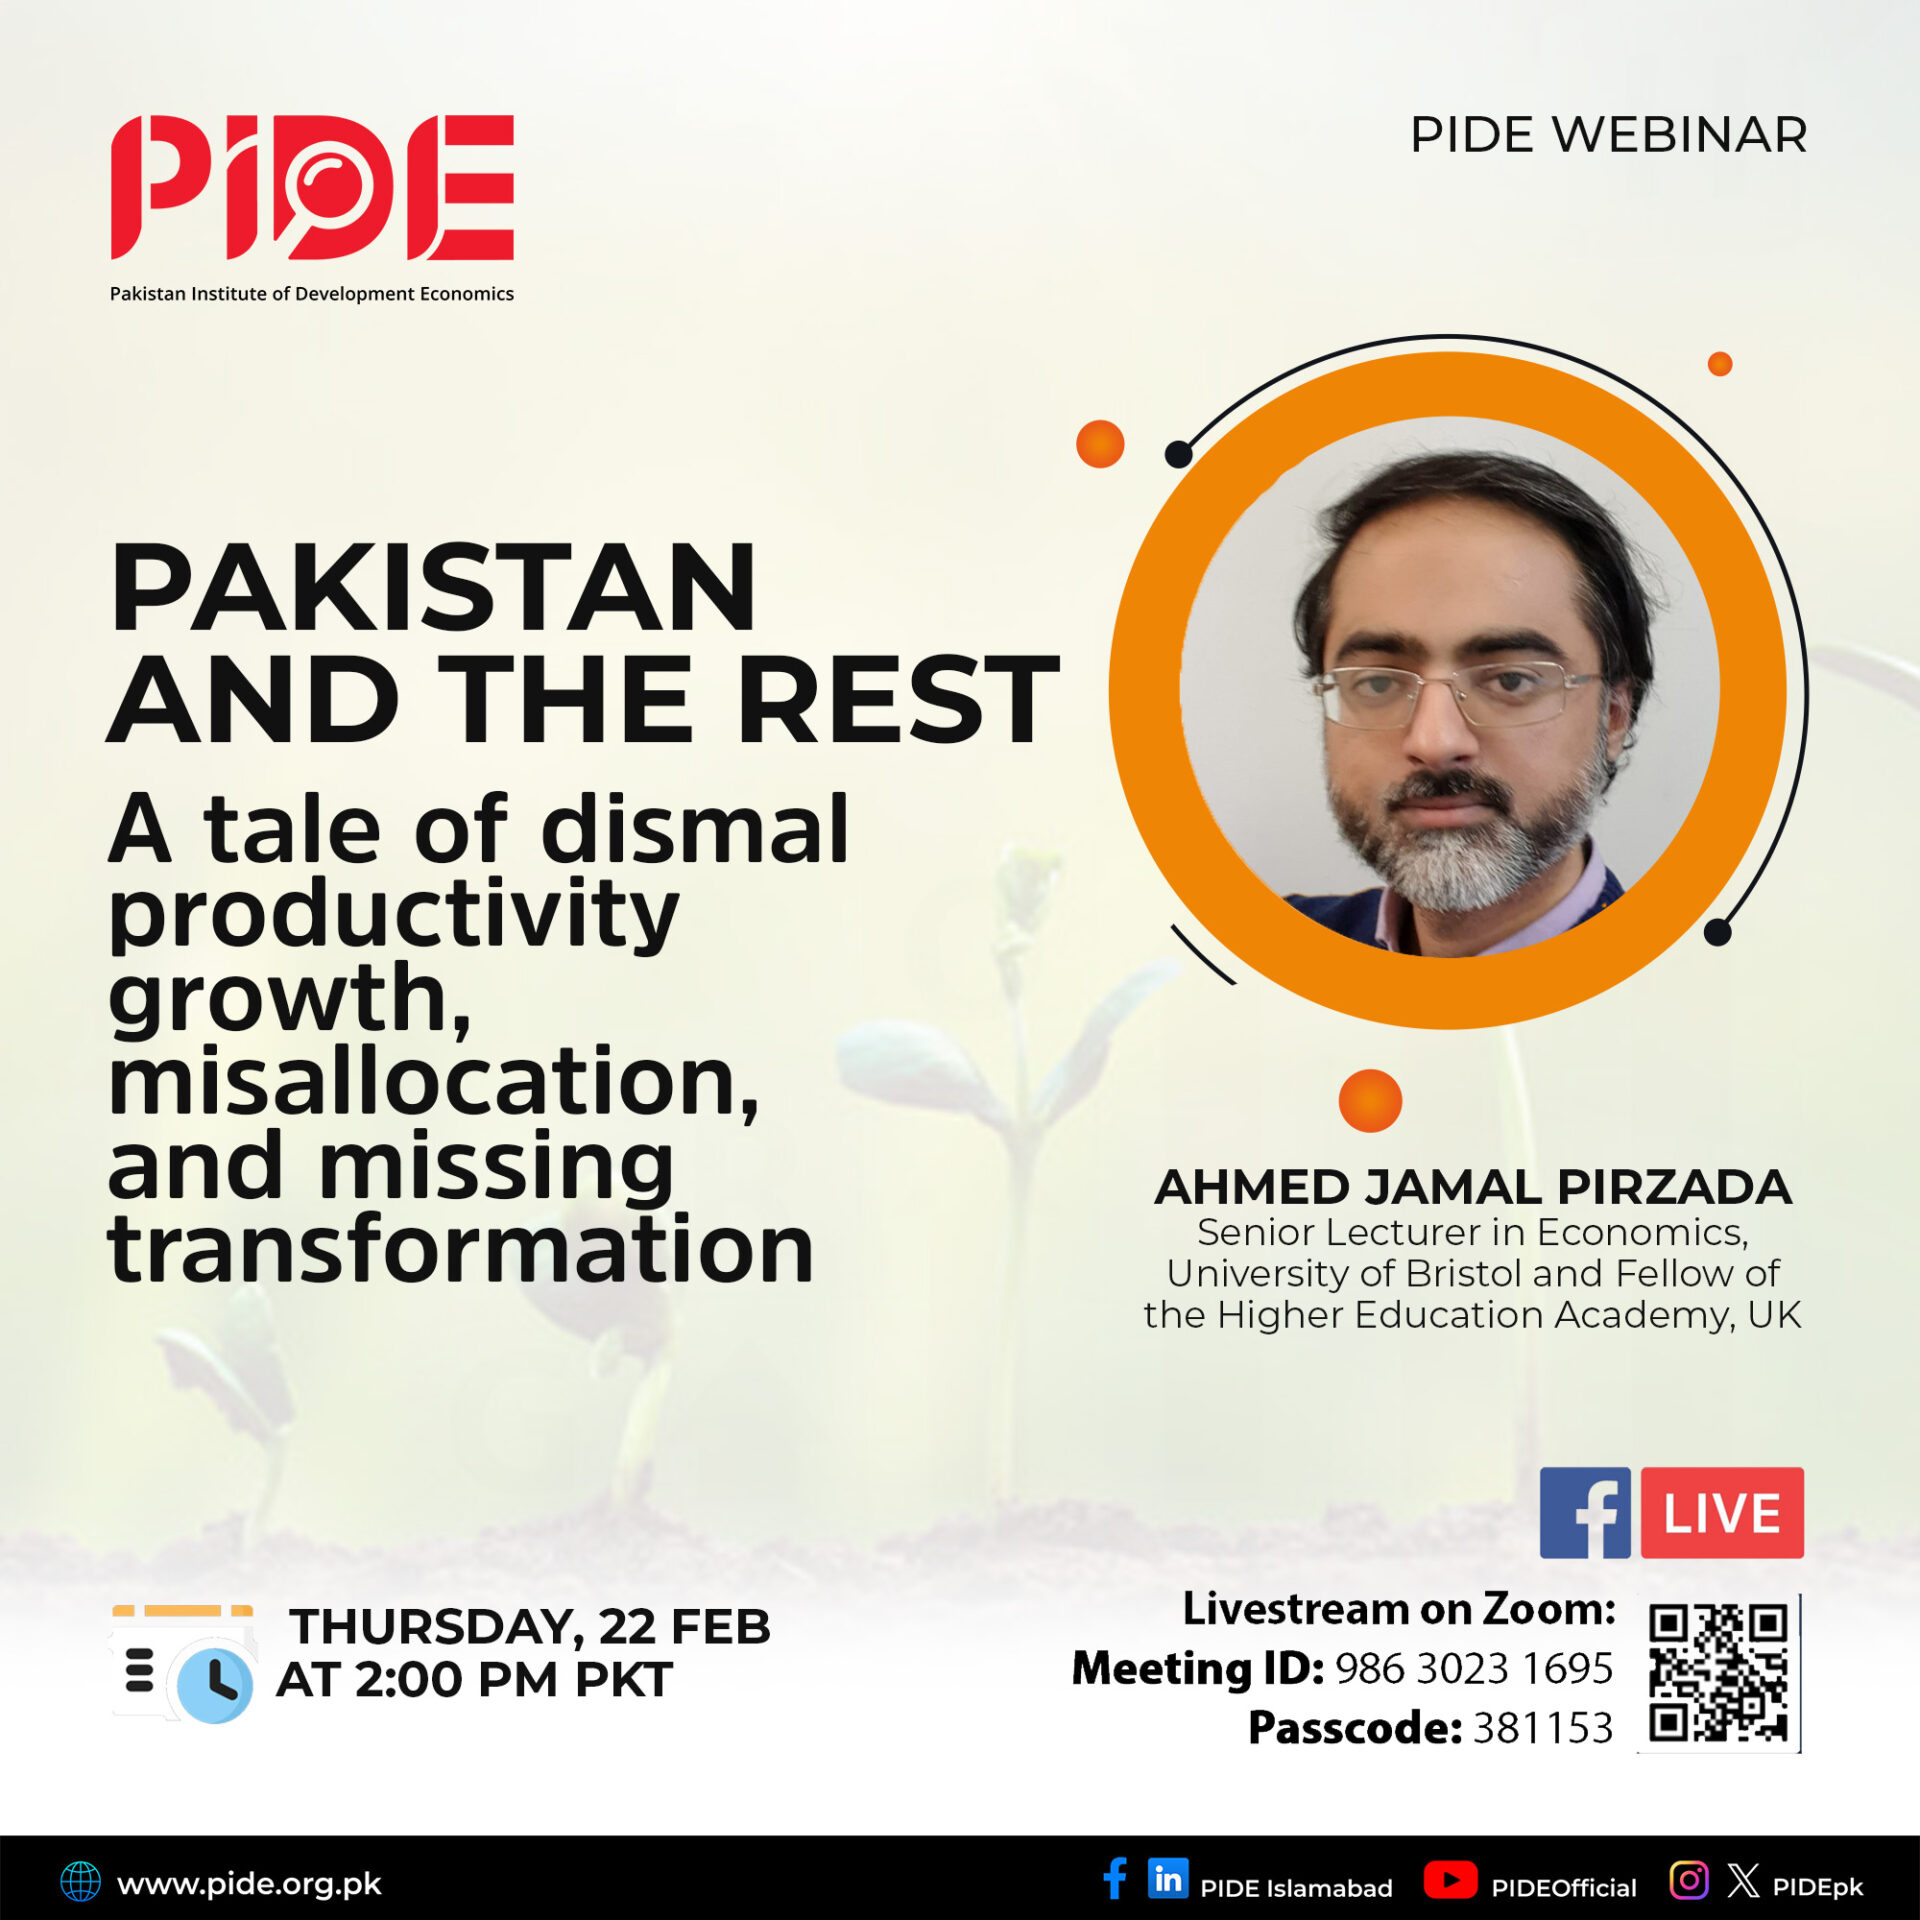 Pakistan and the rest: A tale of dismal productivity growth, misallocation, and missing transformation flyer